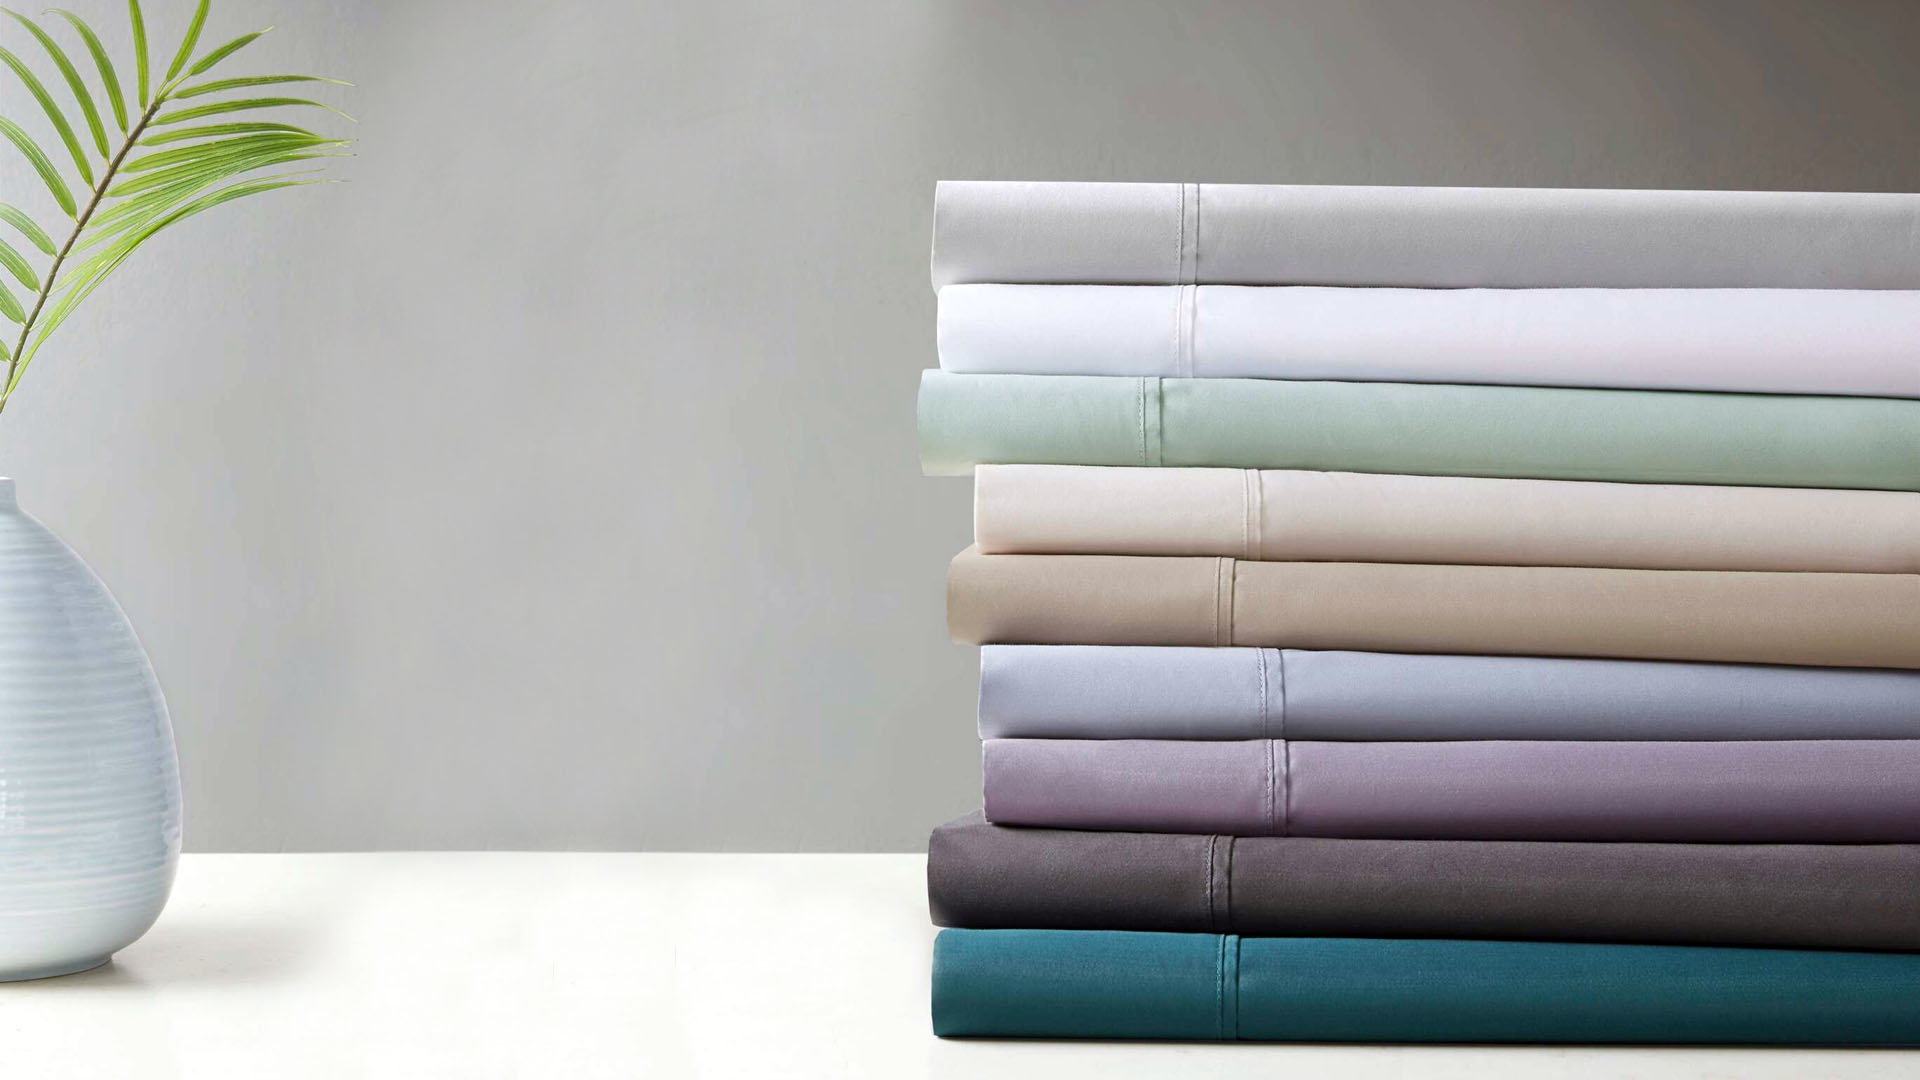 Types of Fabric Used in Bed Sheet